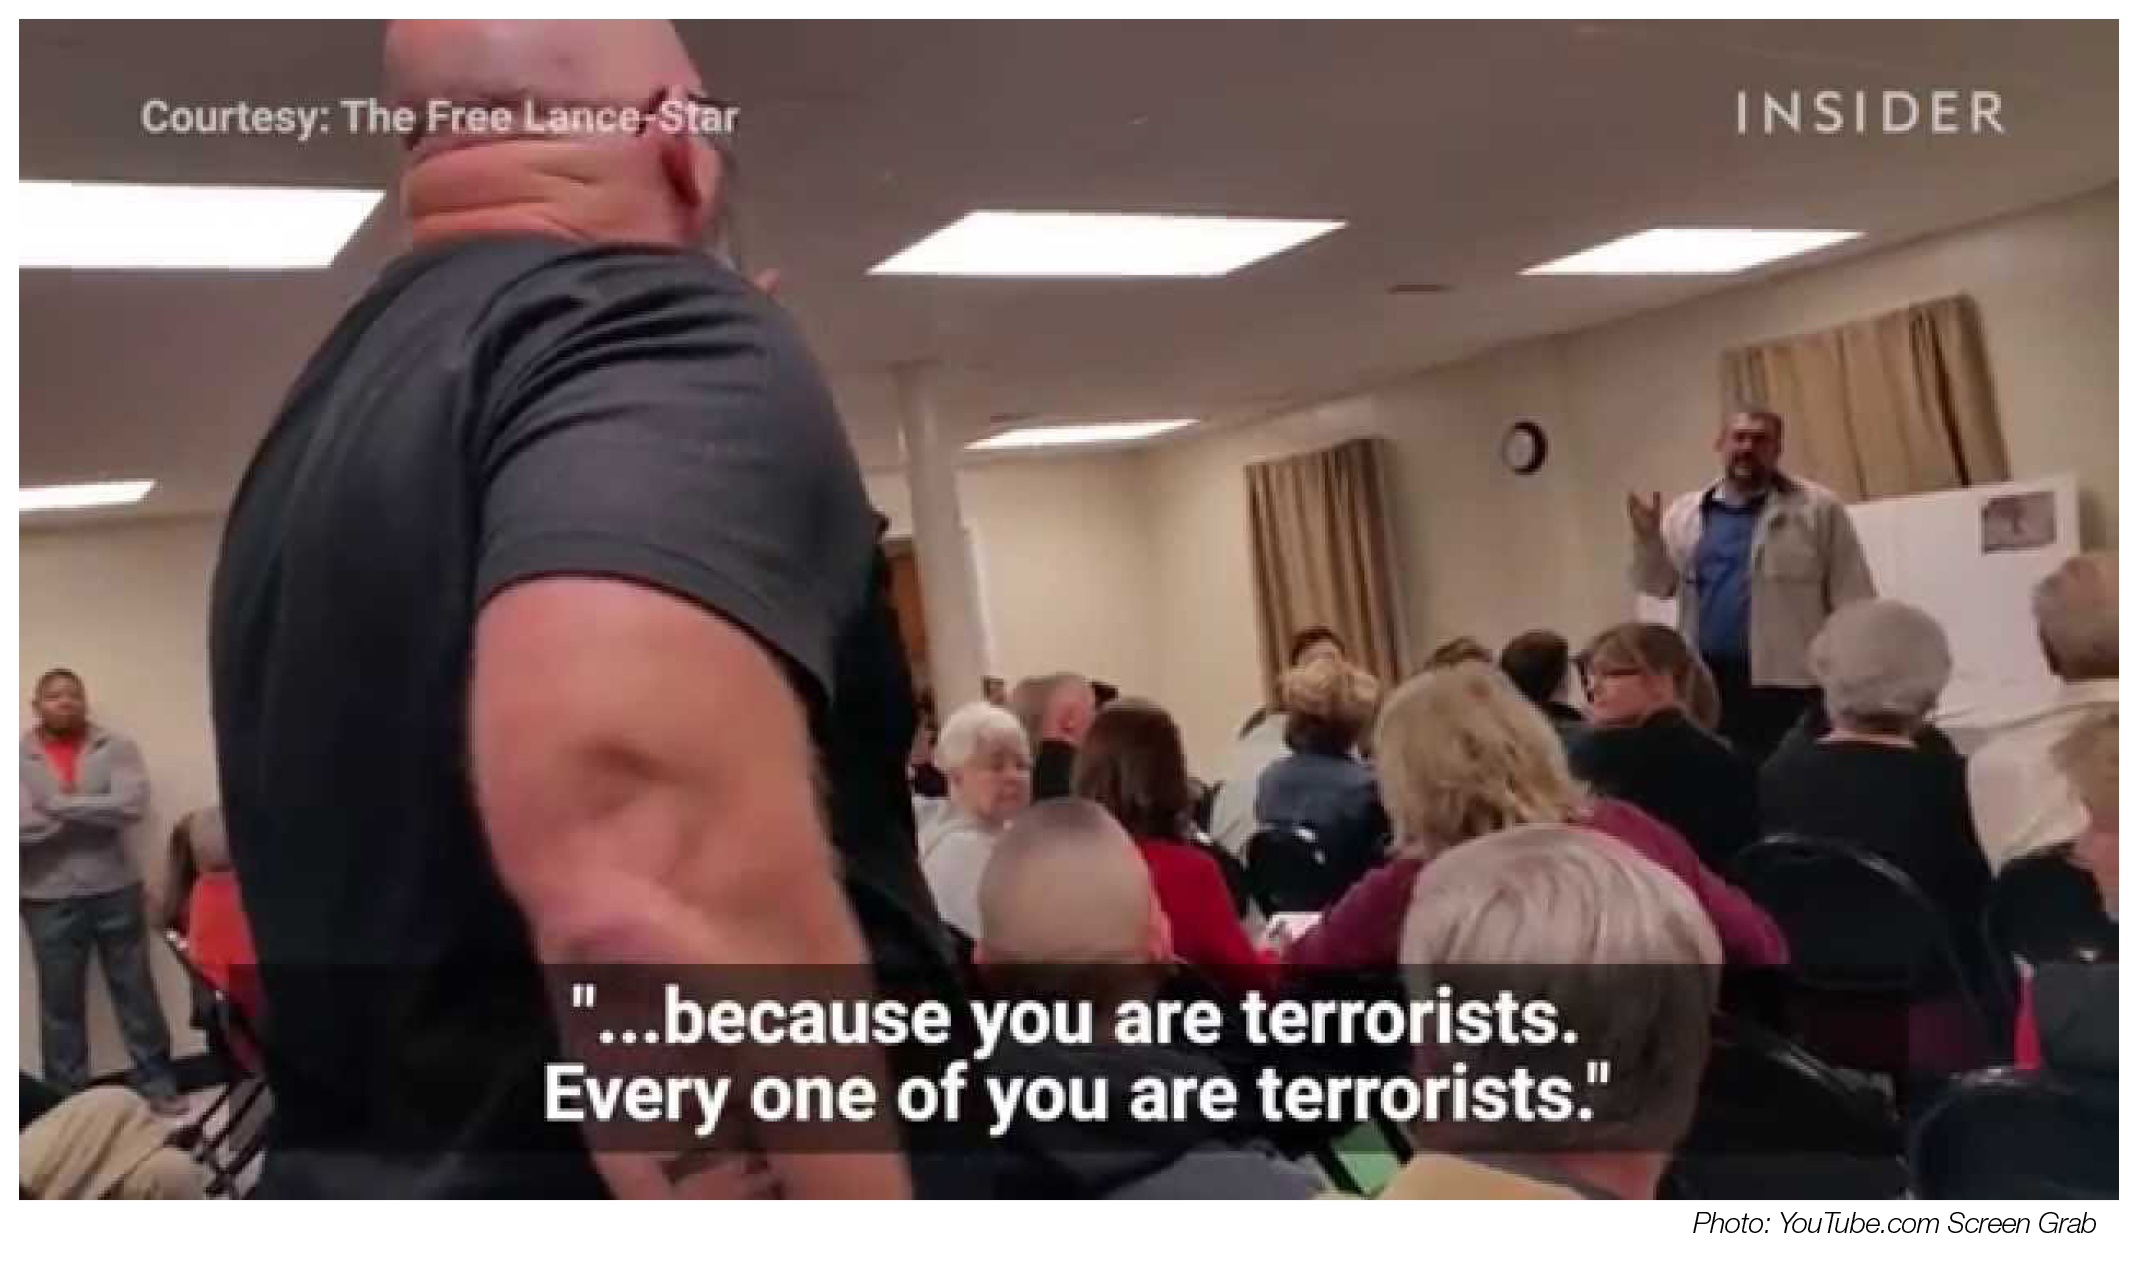 In a community gathering, a man stands and gestures at a speaker in the distance. Image caption reads: "because you are terrorists, every one of you are terrorists."